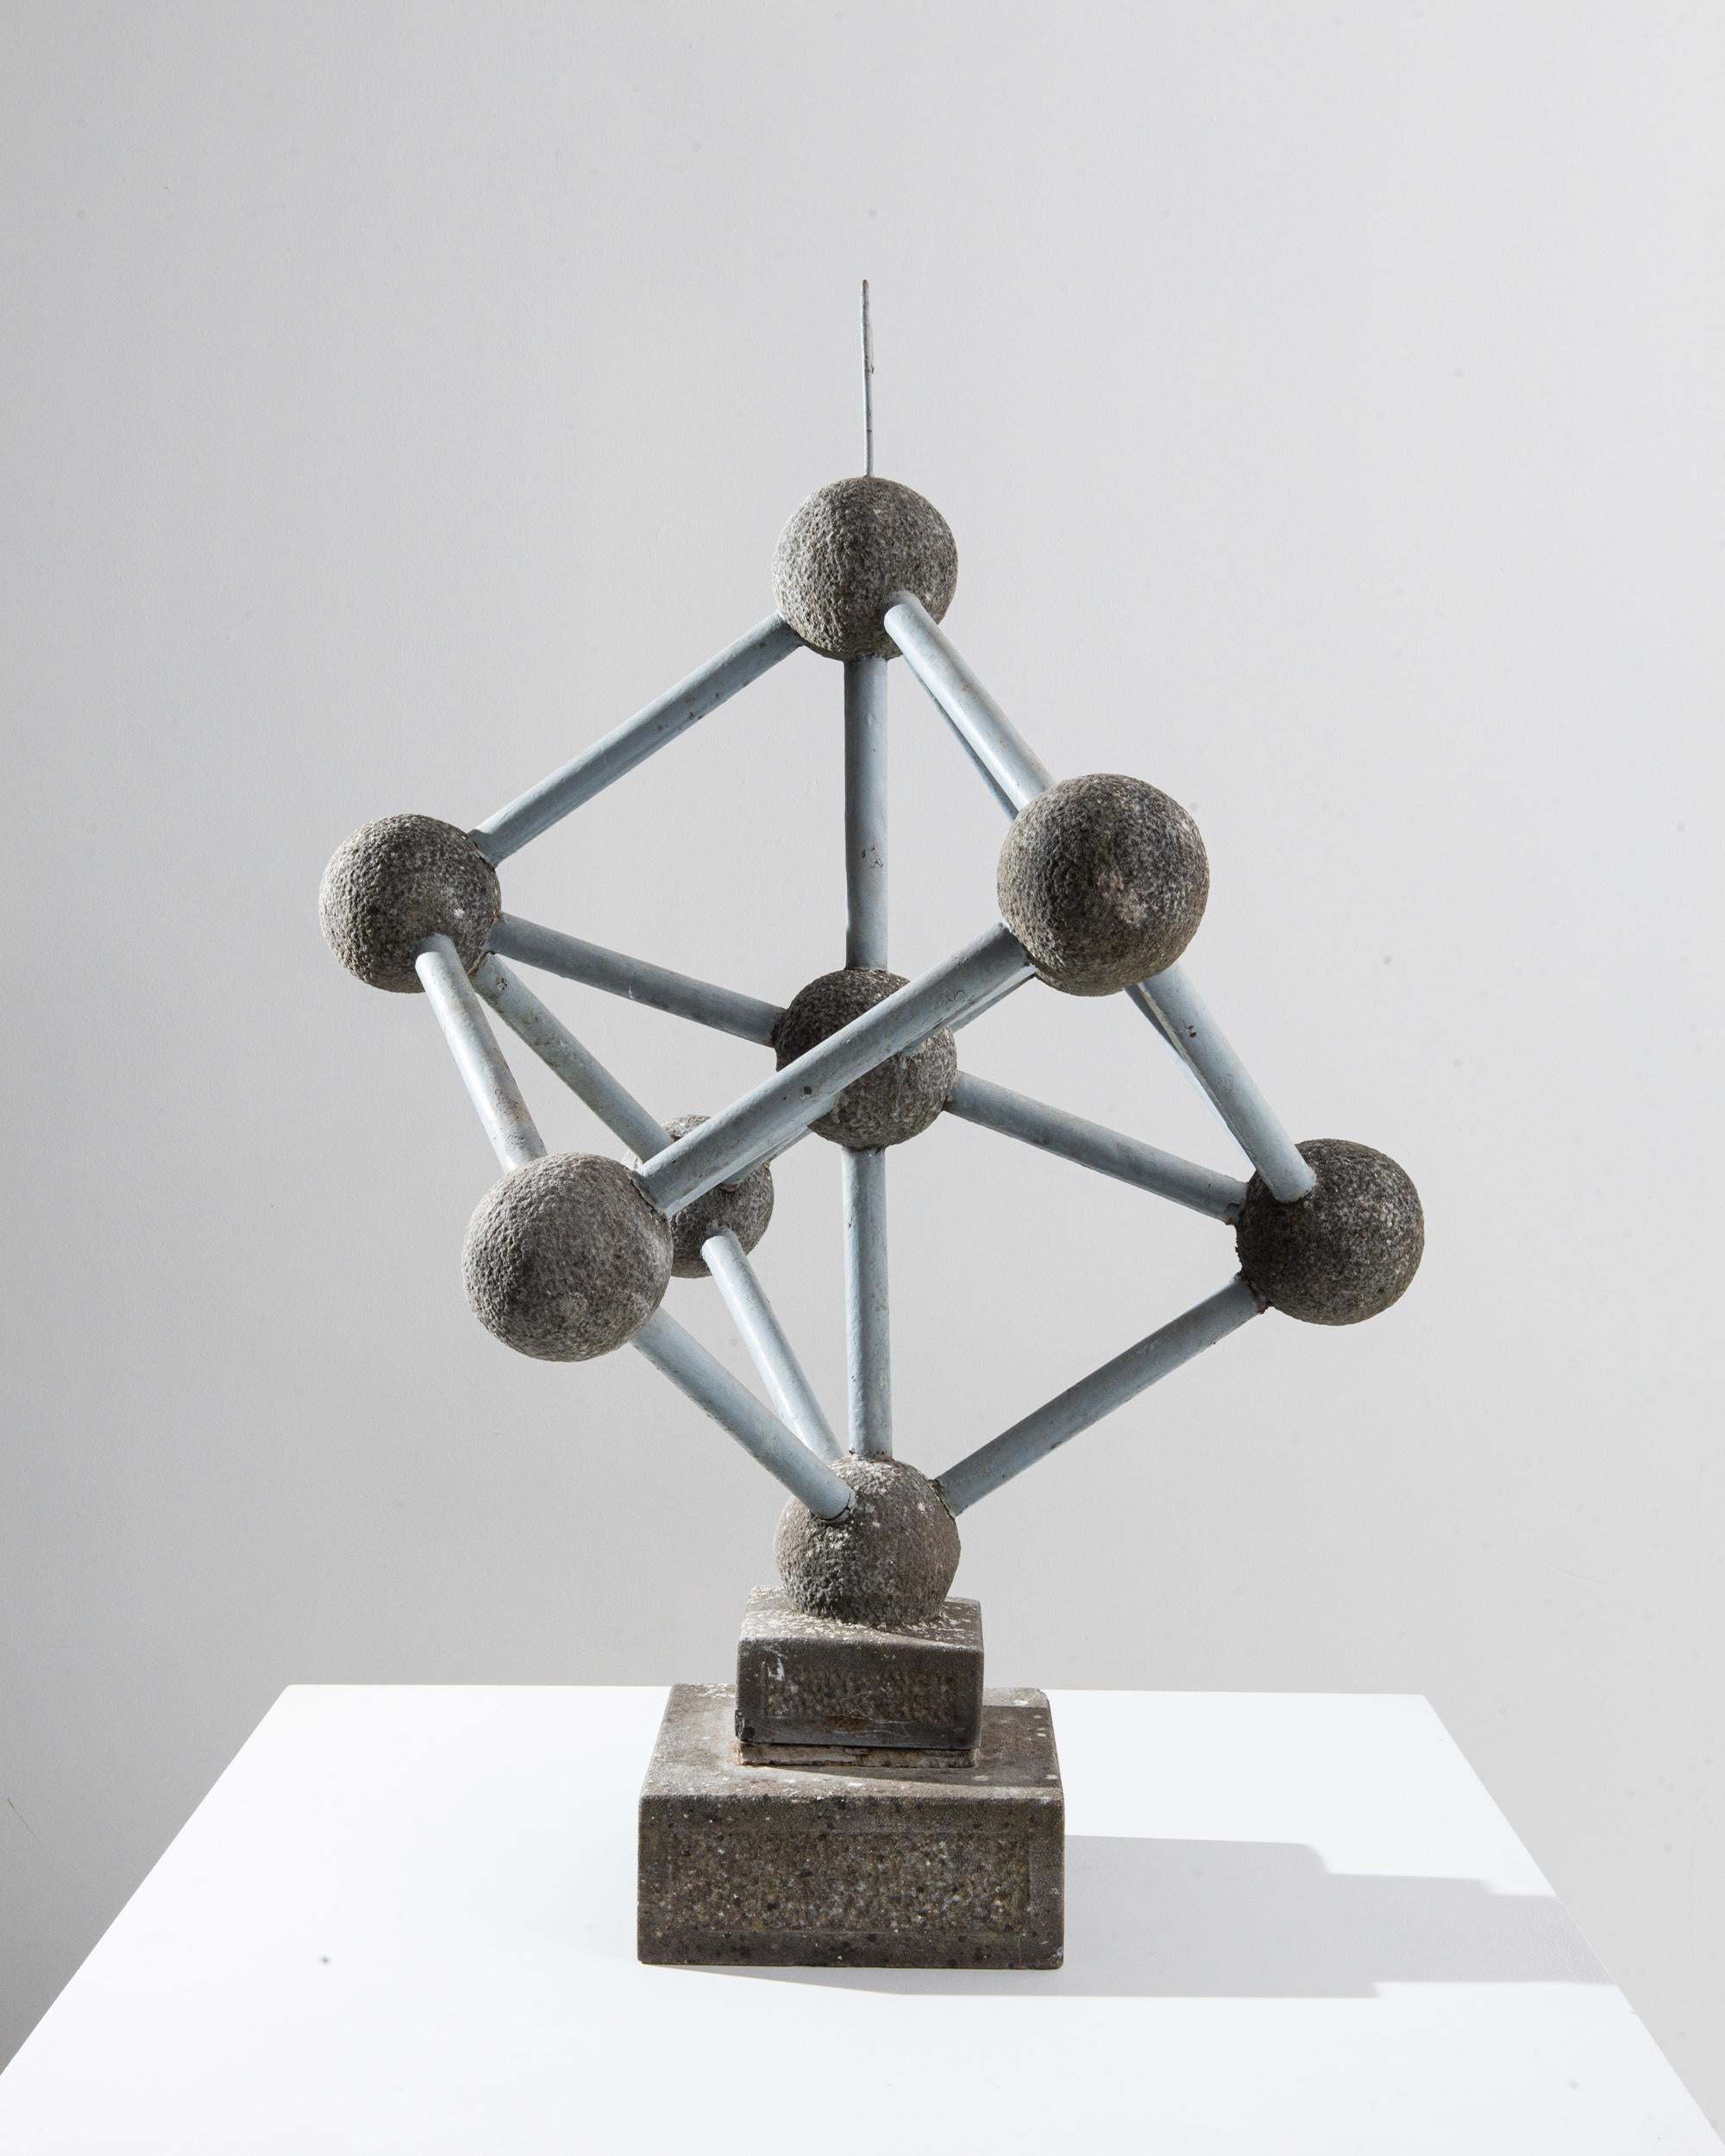 Graphic and monumental, this vintage sculpture depicting the structure of the iron molecule, also a notable Belgian landmark, possesses an austere beauty and a poignant resonance. Made in Francein the 20th Century, the spherical electrons are made